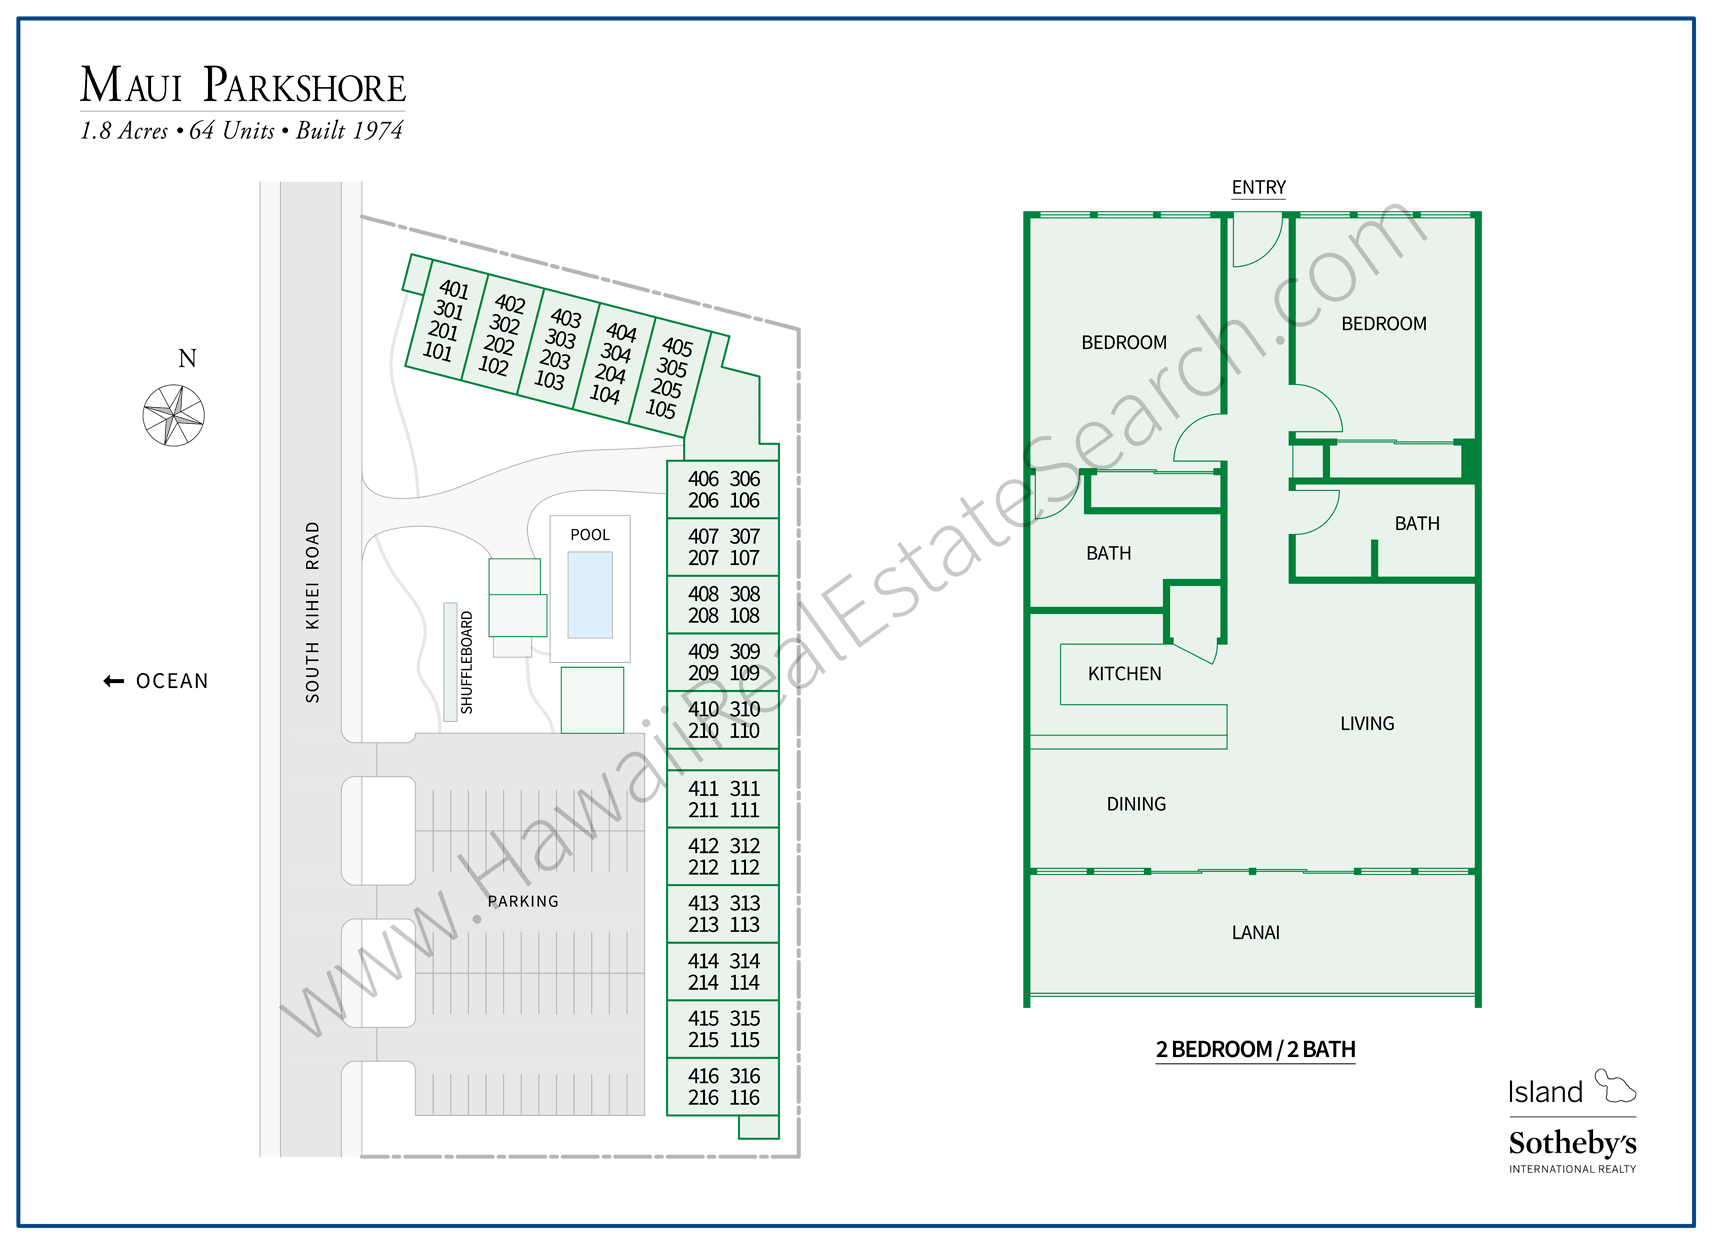 Maui Parkshore Property Map and Floor Plan